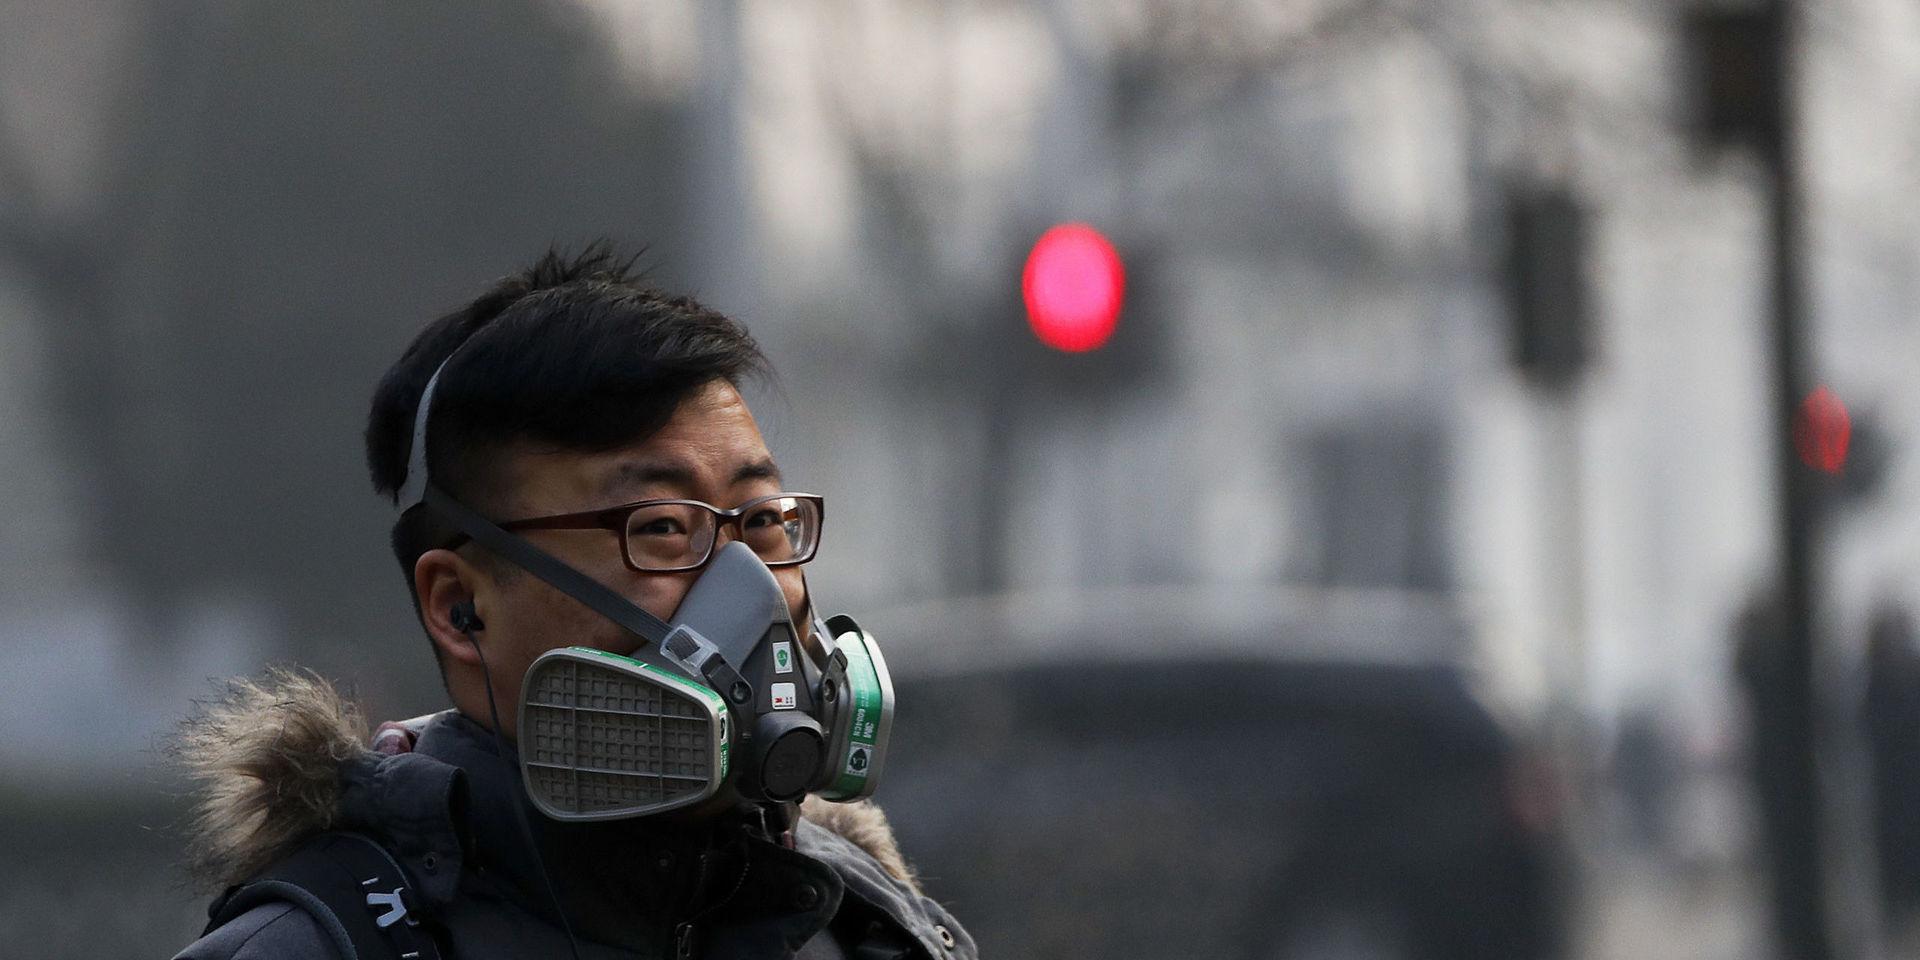 A man wearing a mask walks on a street in Beijing as the capital of China is blanked by smog on Friday, Dec. 30, 2016. China has long had some of the worst air in the world, blamed on its reliance on coal and a surplus of older, less efficient cars. It has set pollution reduction goals, but also has plans to increase coal mining capacity and eased caps on production when faced with rising energy prices. (AP Photo/Andy Wong)